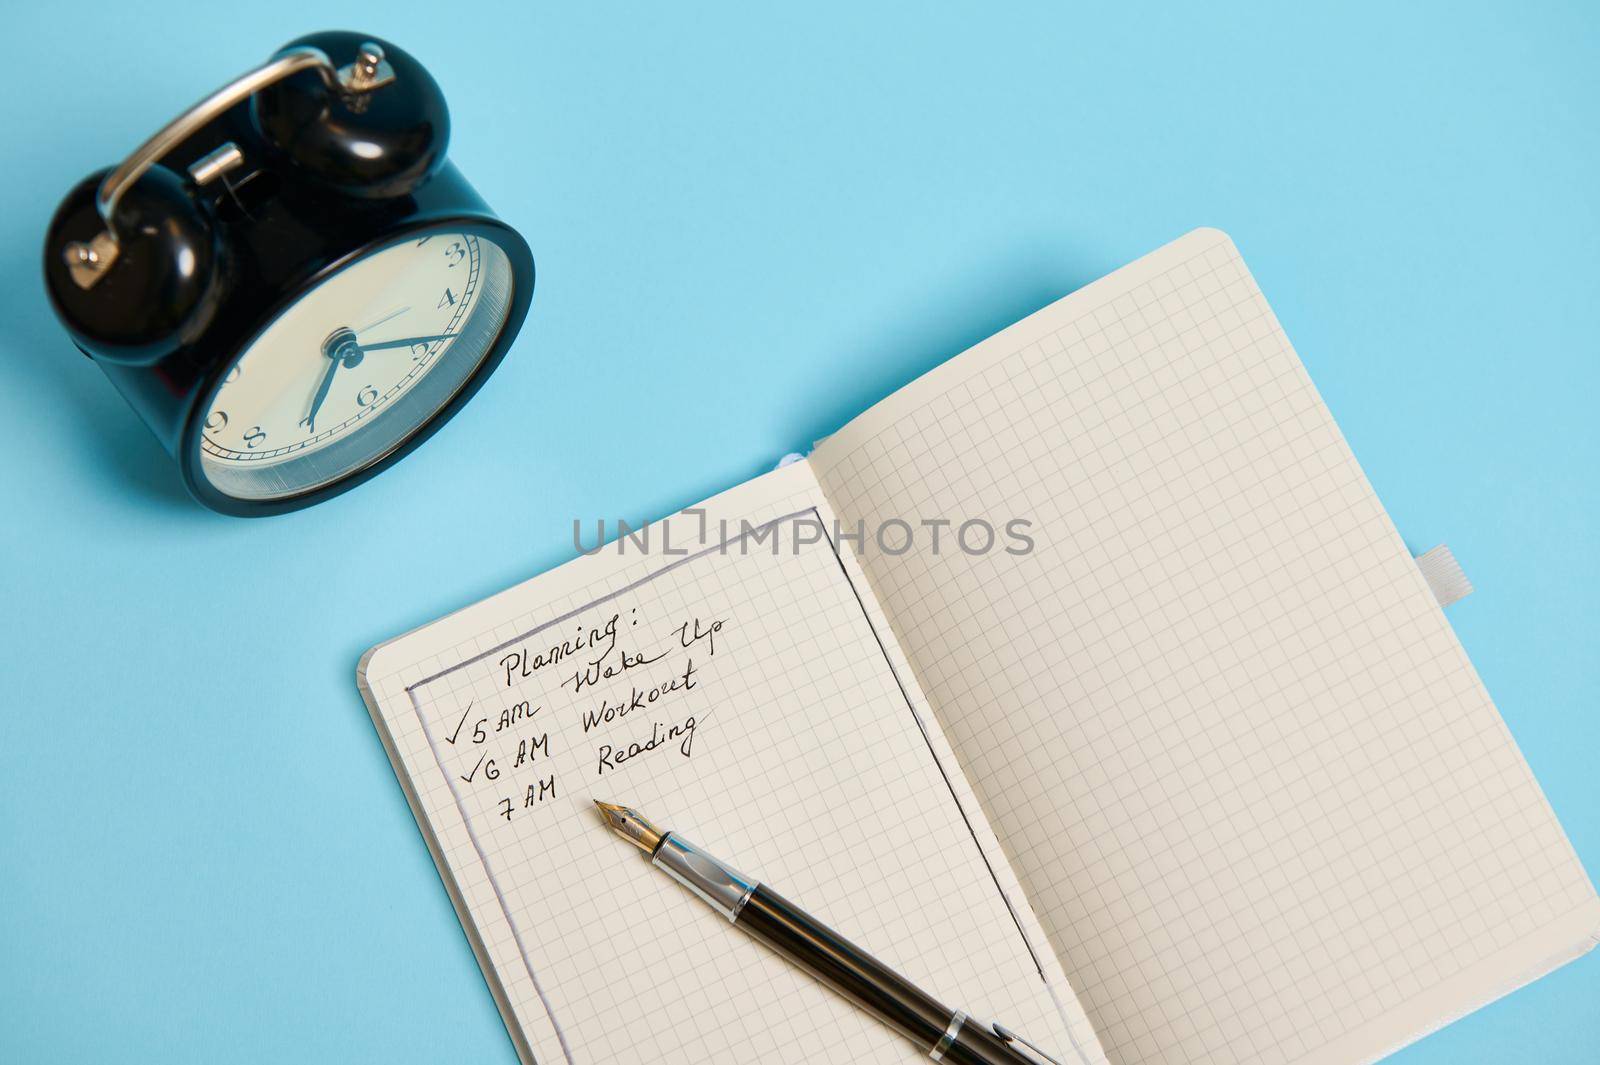 High angle view of an open organizer with plans for the day, ink pen and alarm clock on blue background with copy space